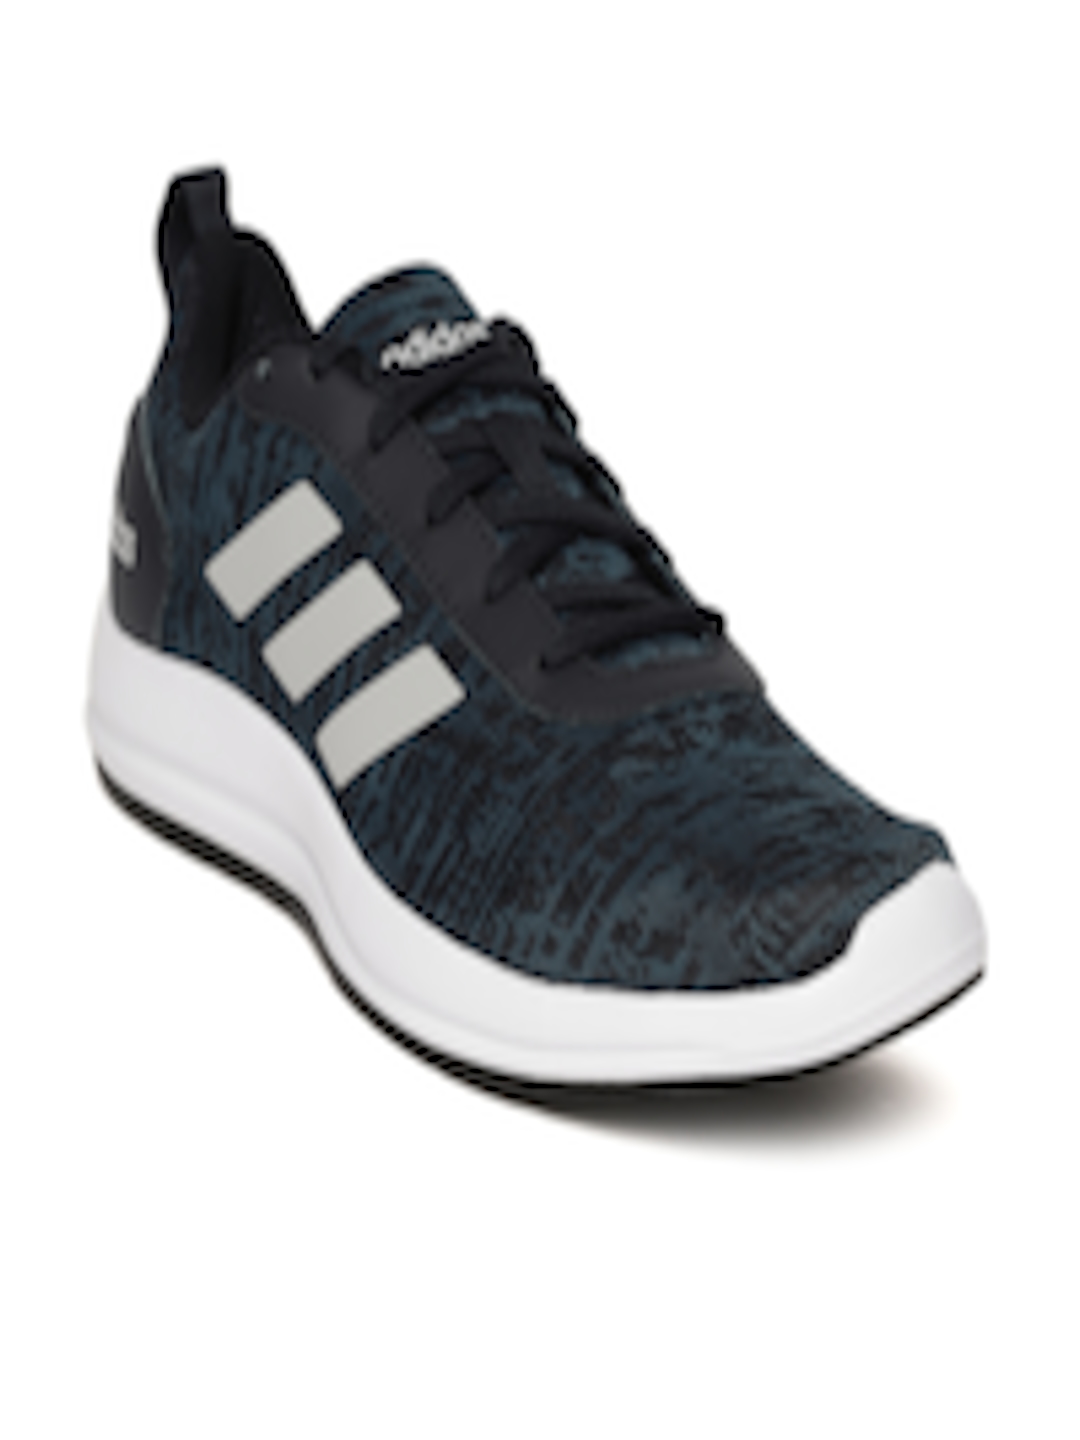 Buy ADIDAS Men Blue Running Shoes - Sports Shoes for Men 6841992 | Myntra